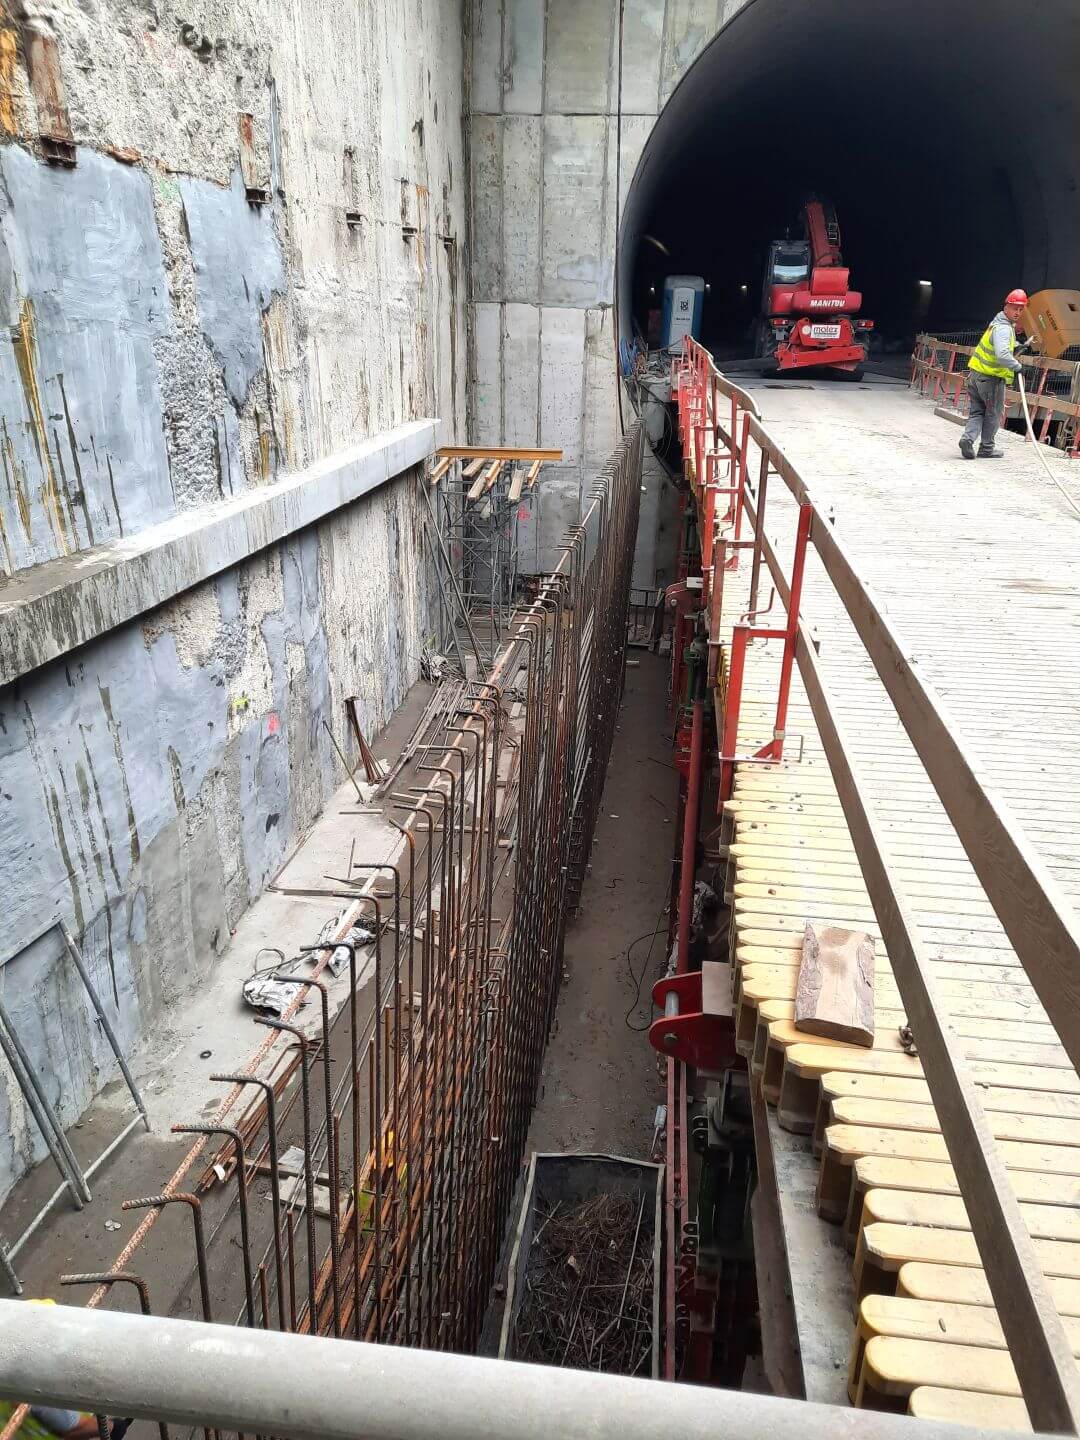 Progress of Works on the Construction of the Tunnel Under Swina